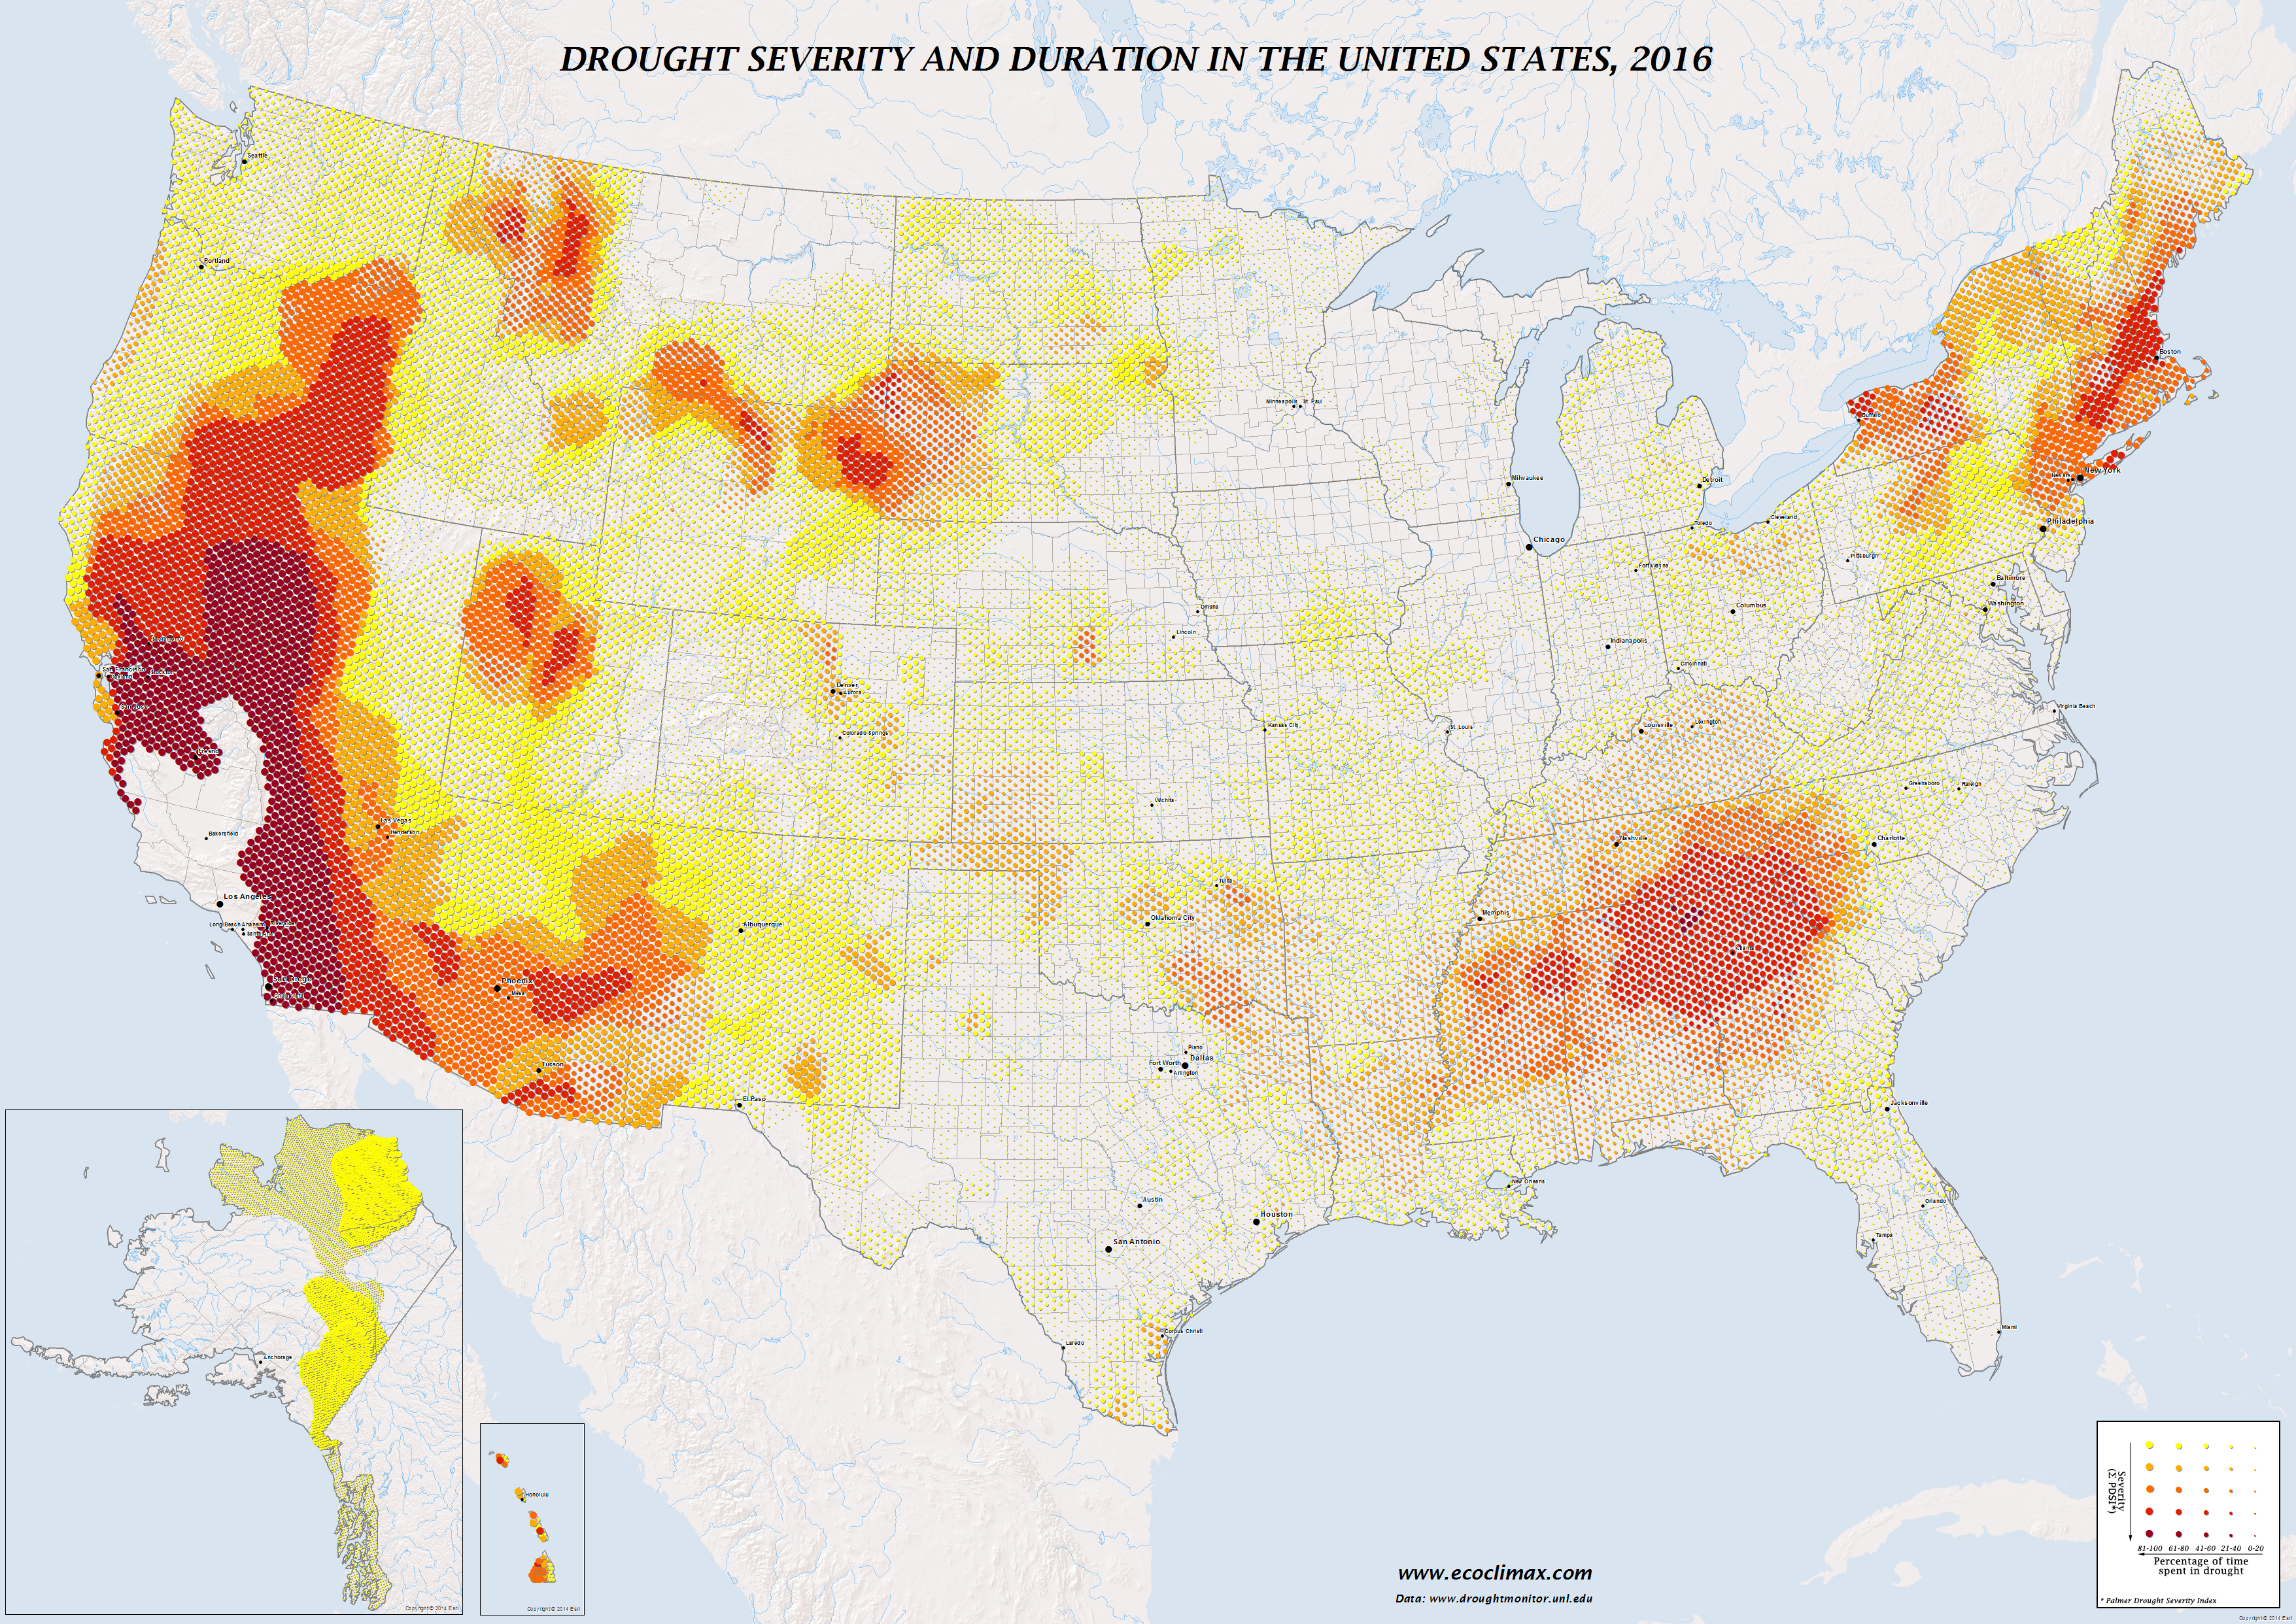 Drought severity & duration in the U.S, 2016